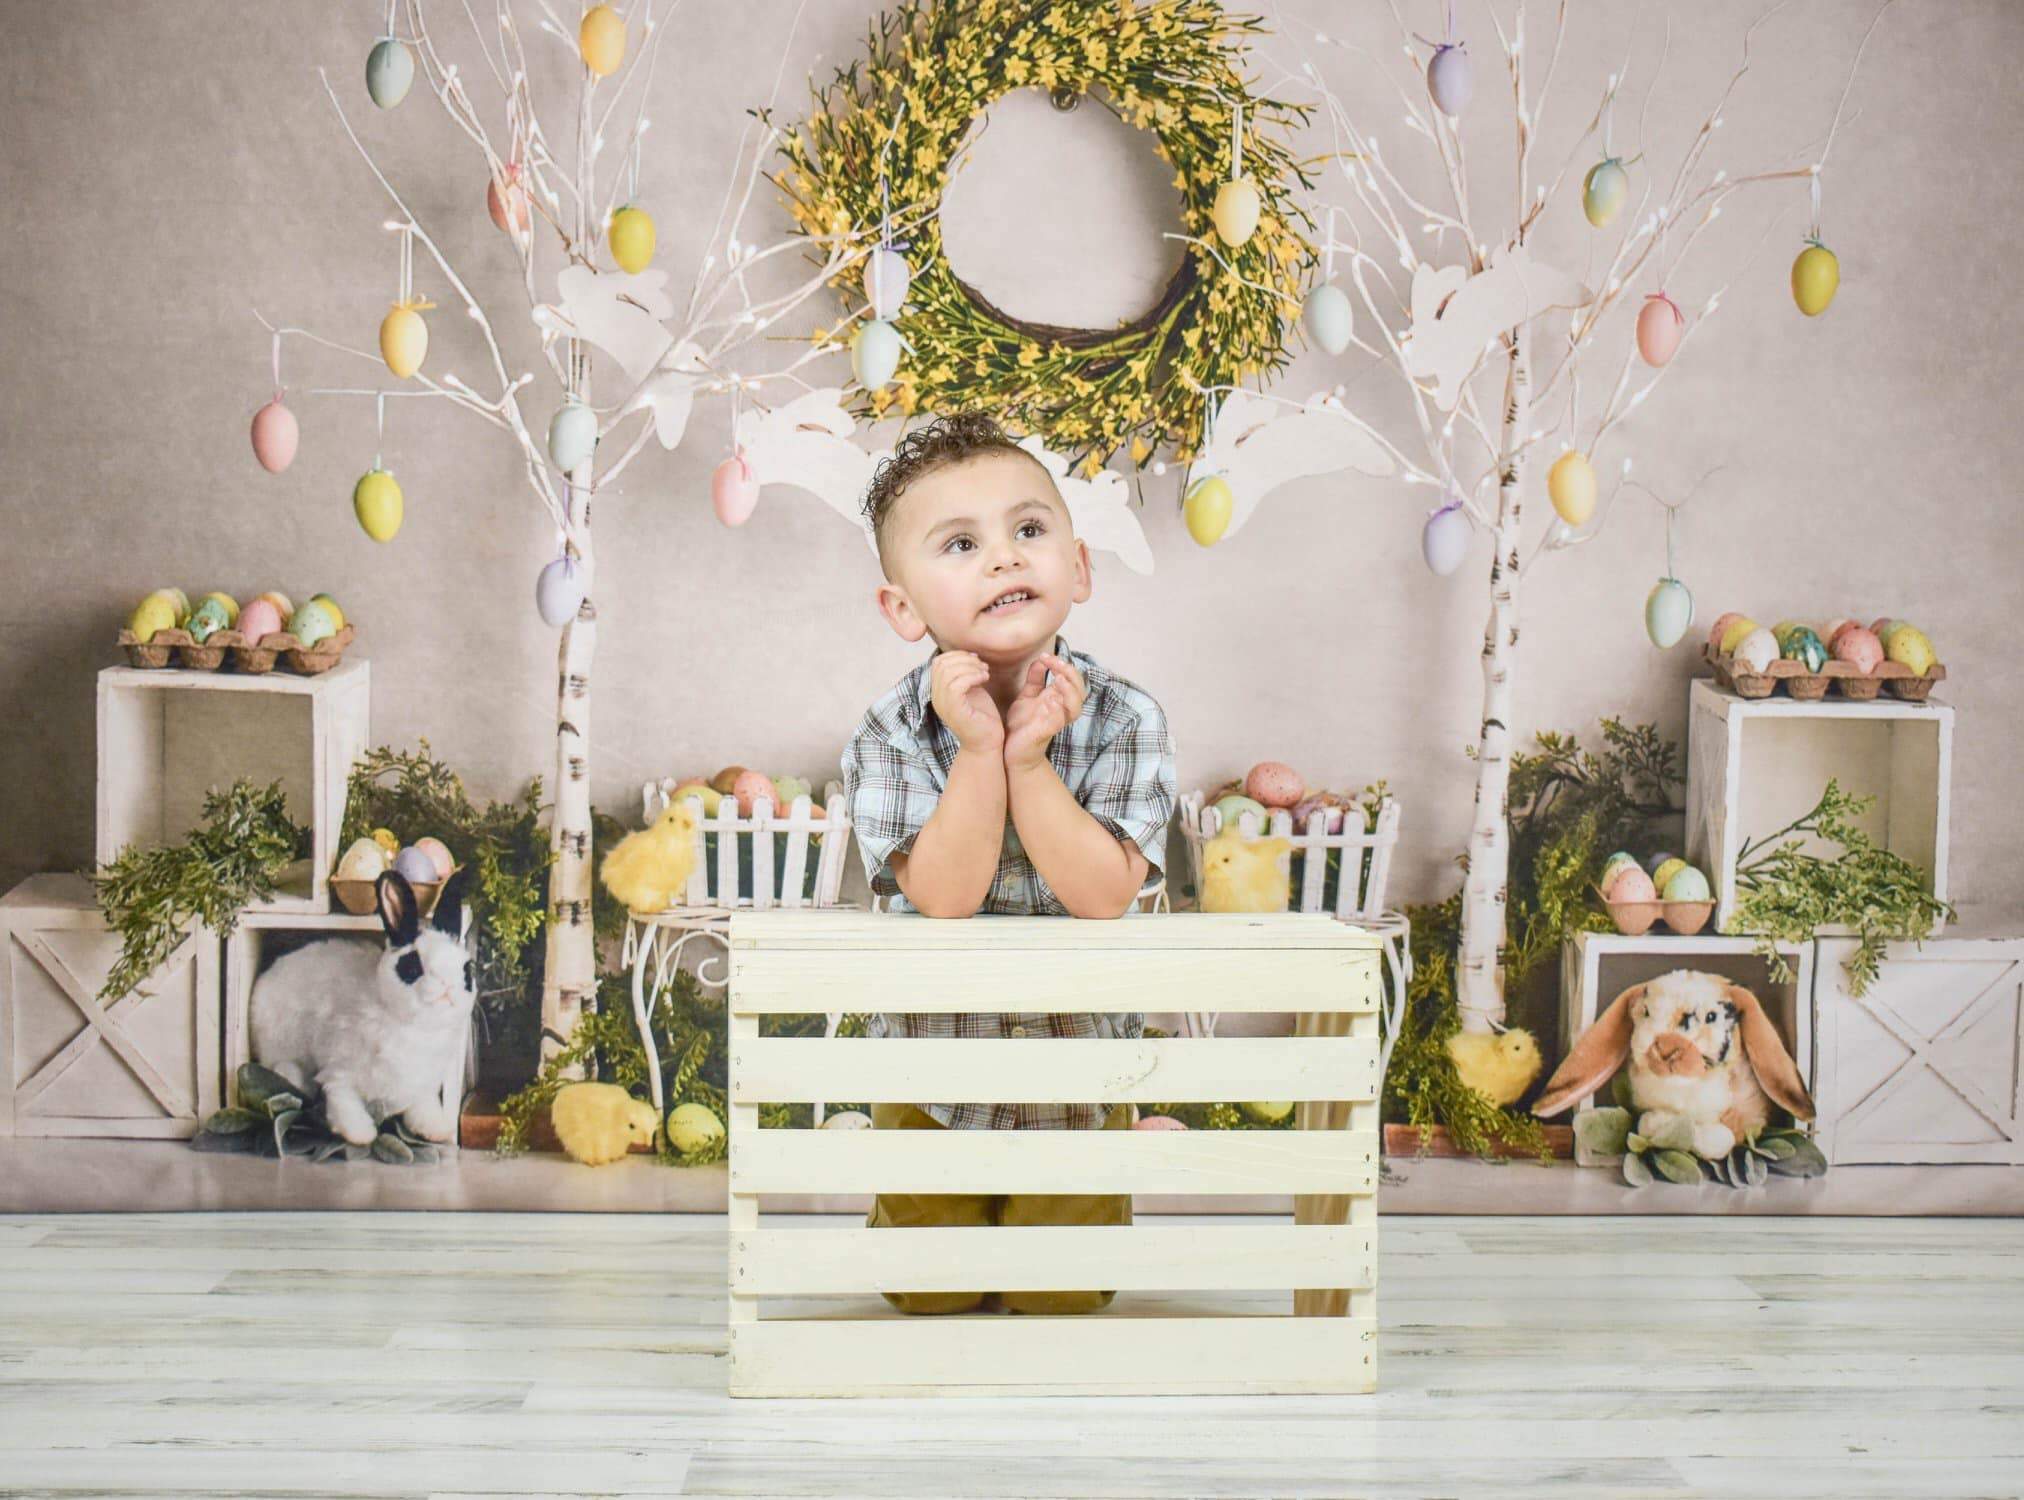 Katebackdrop：Kate Easter Egg Trees and Bunnies Backdrop Designed By Mandy Ringe Photography